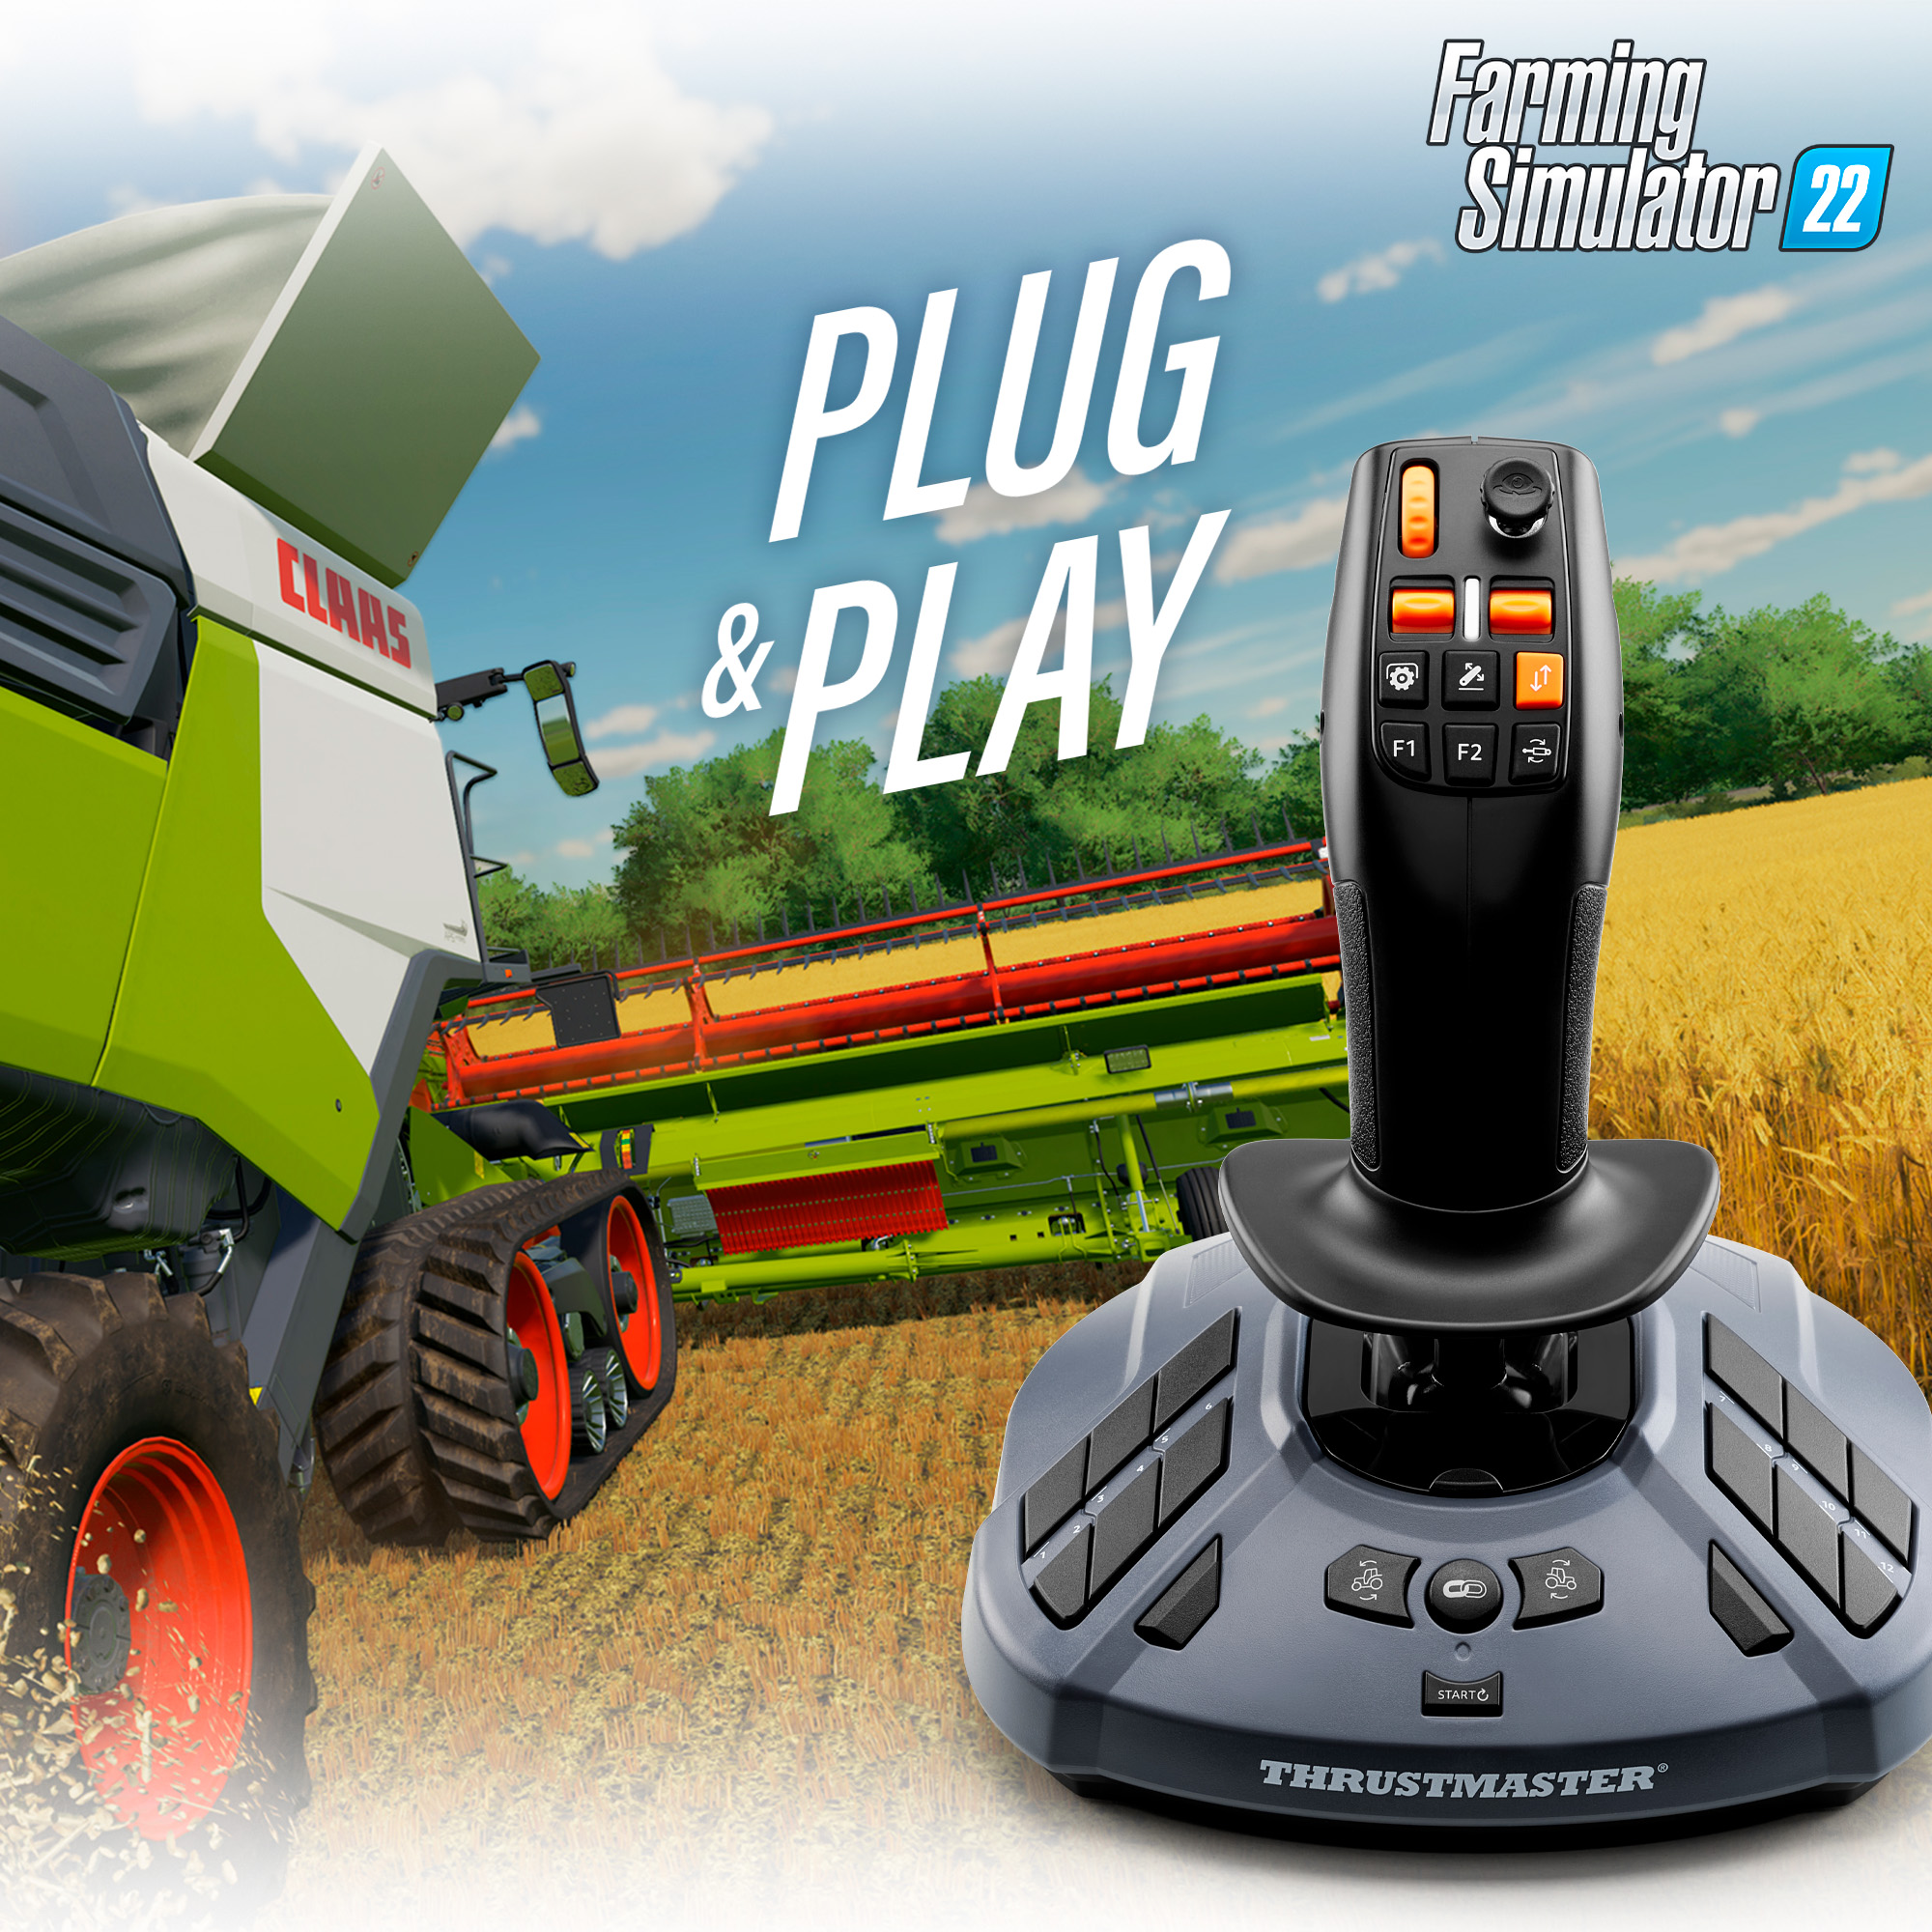 Thrustmaster - Get on your tractor! 🚜 The SimTask Farmstick is compatible  with PC and Plug & Play with Farming Simulator 22! 👉